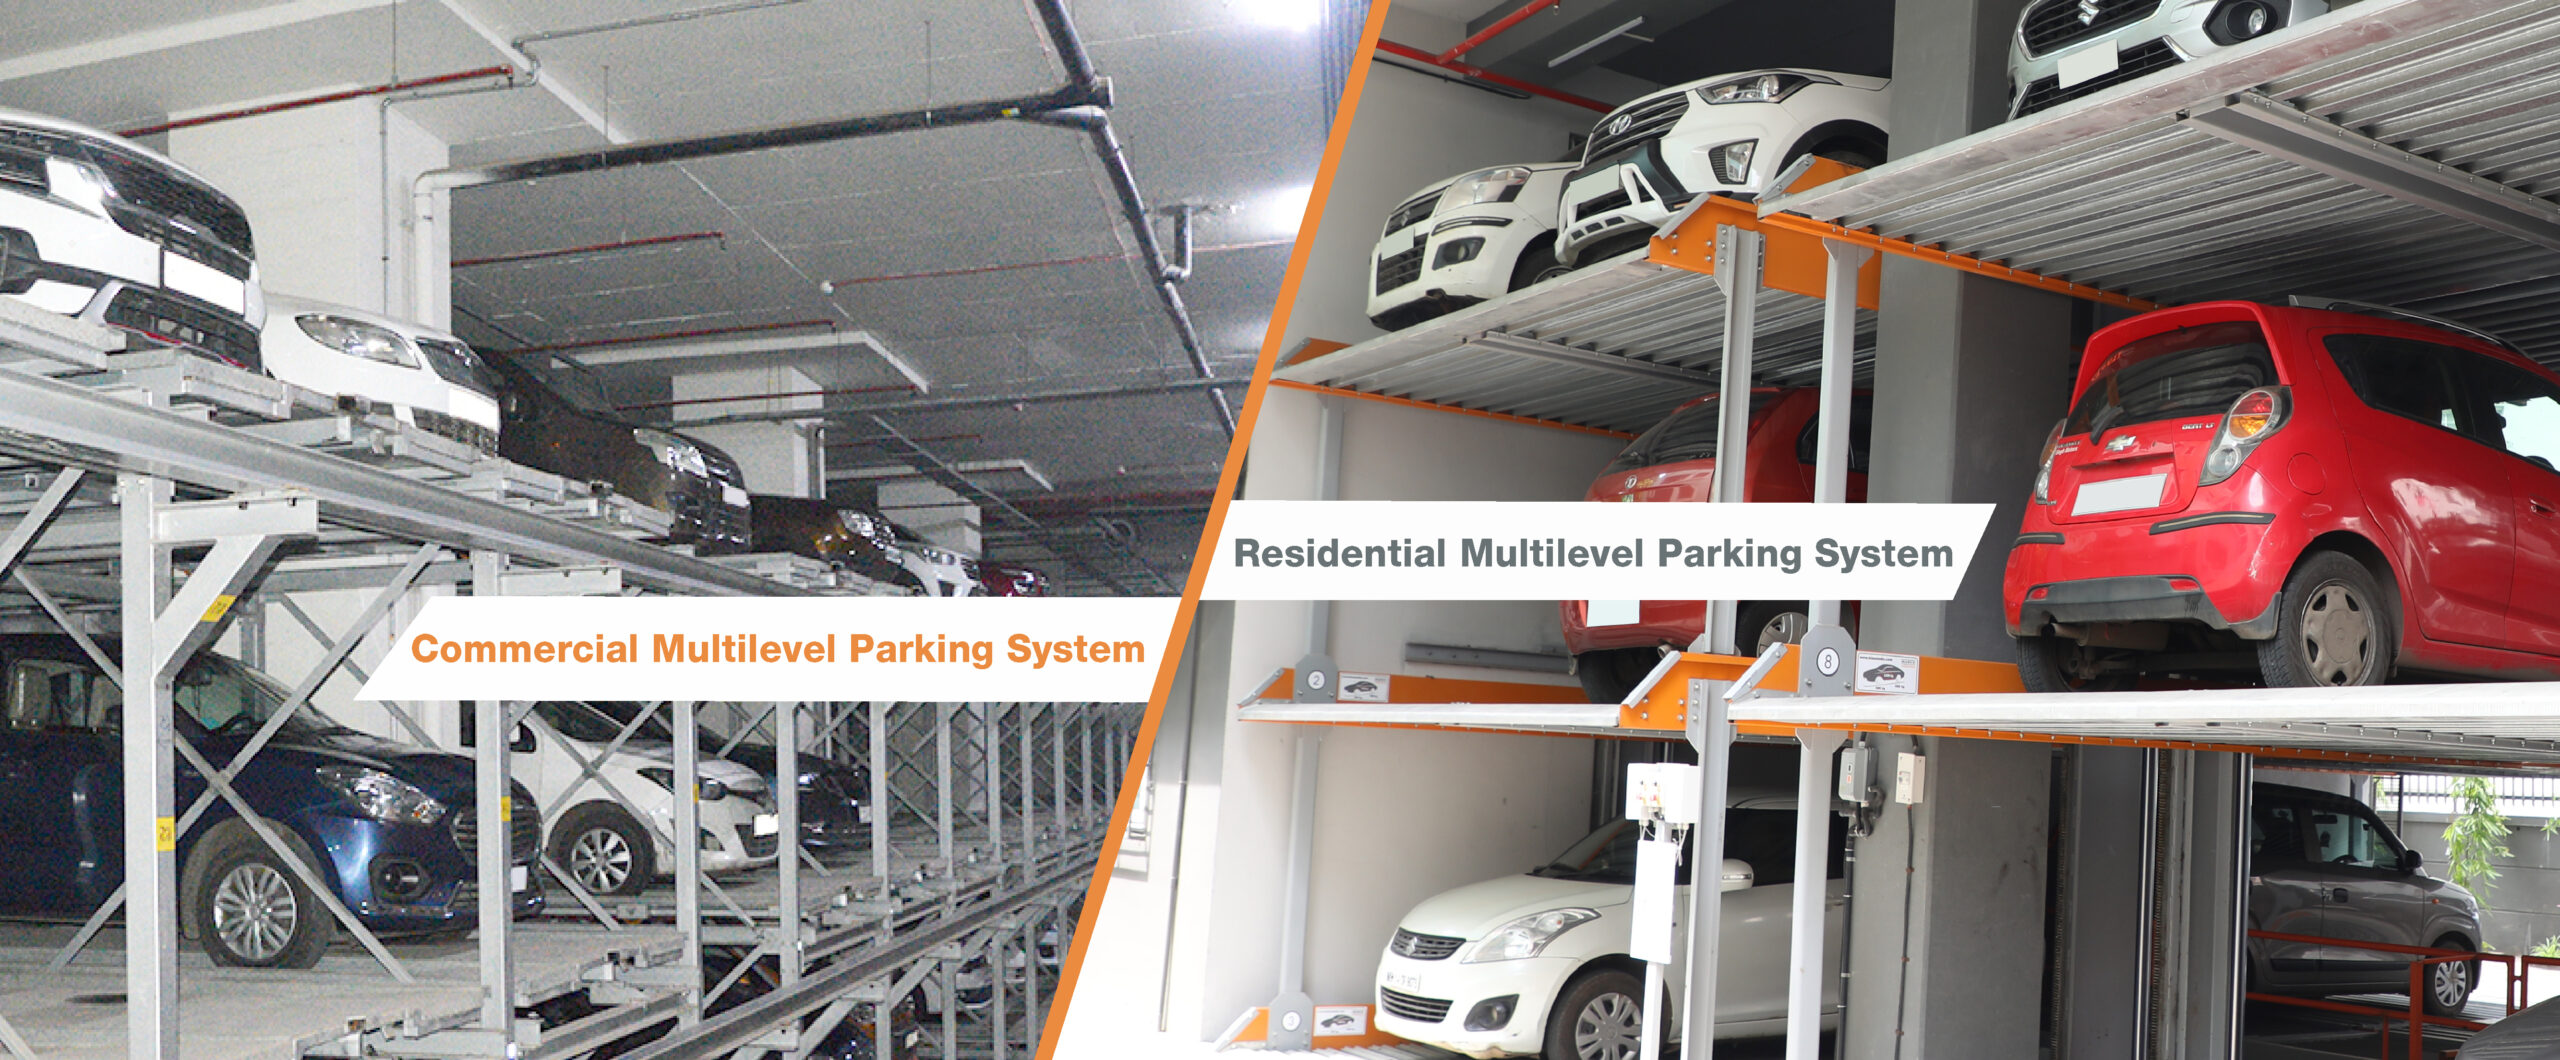 Understanding the Key Differences in Commercial vs Residential Multi-Level Parking Systems